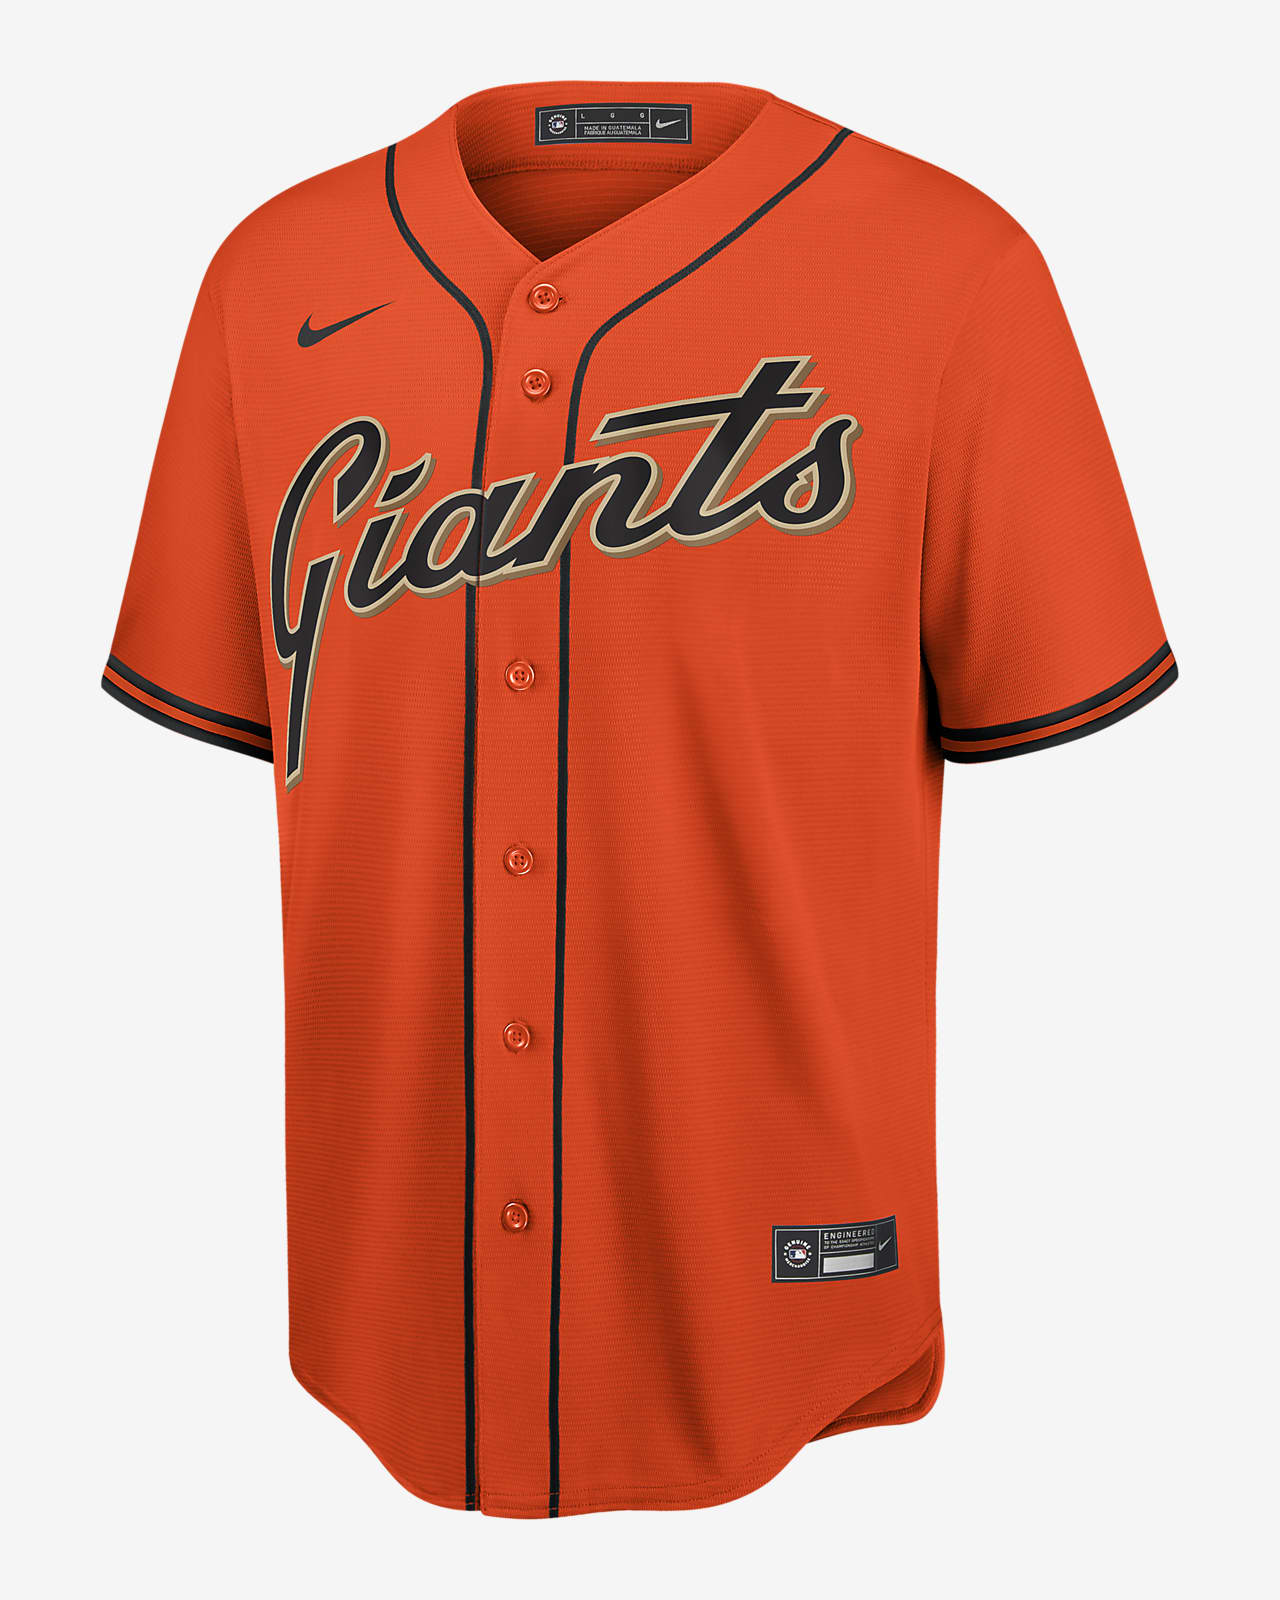 youth sf giants jersey